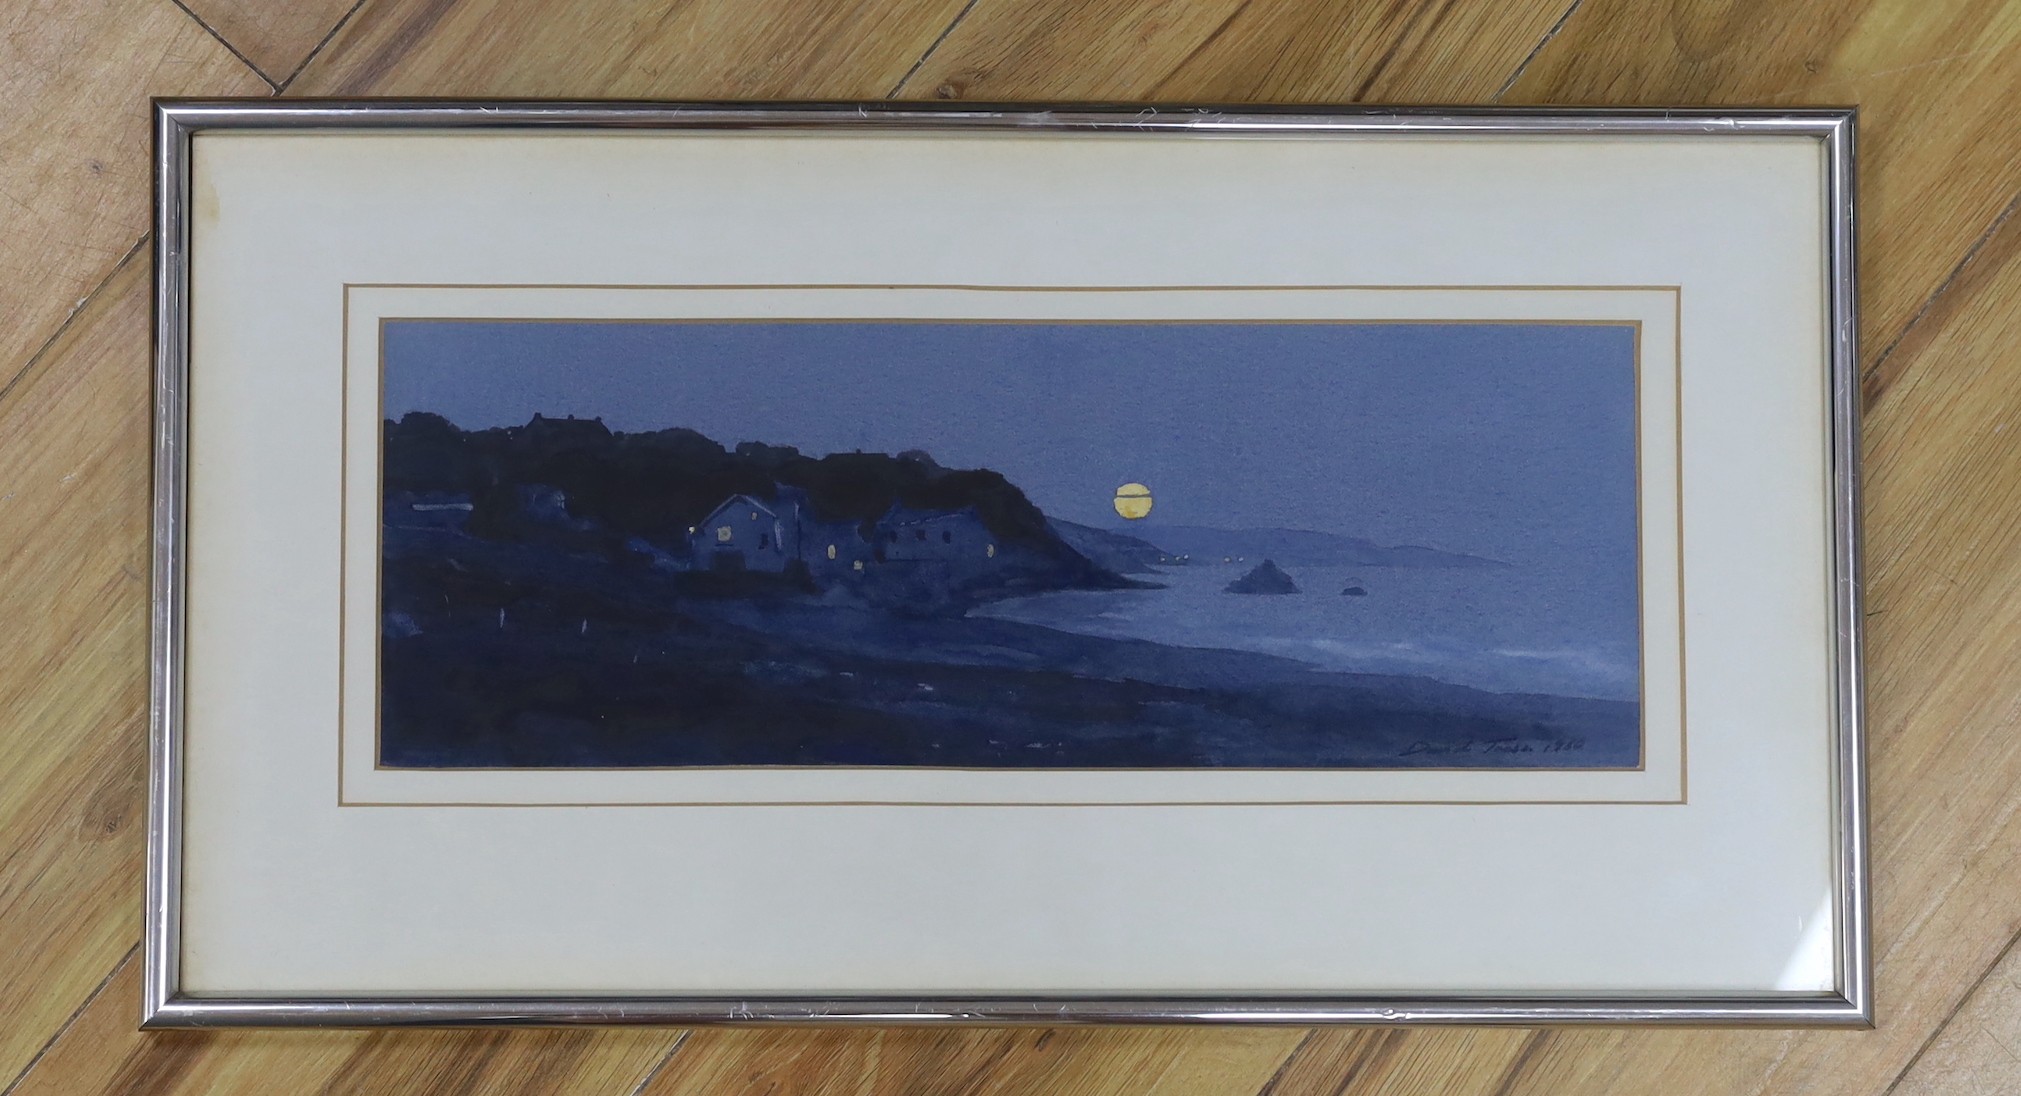 David Trass, watercolour, Fishermen's cottages by moonlight, signed and dated 1980, 15 x 42cm